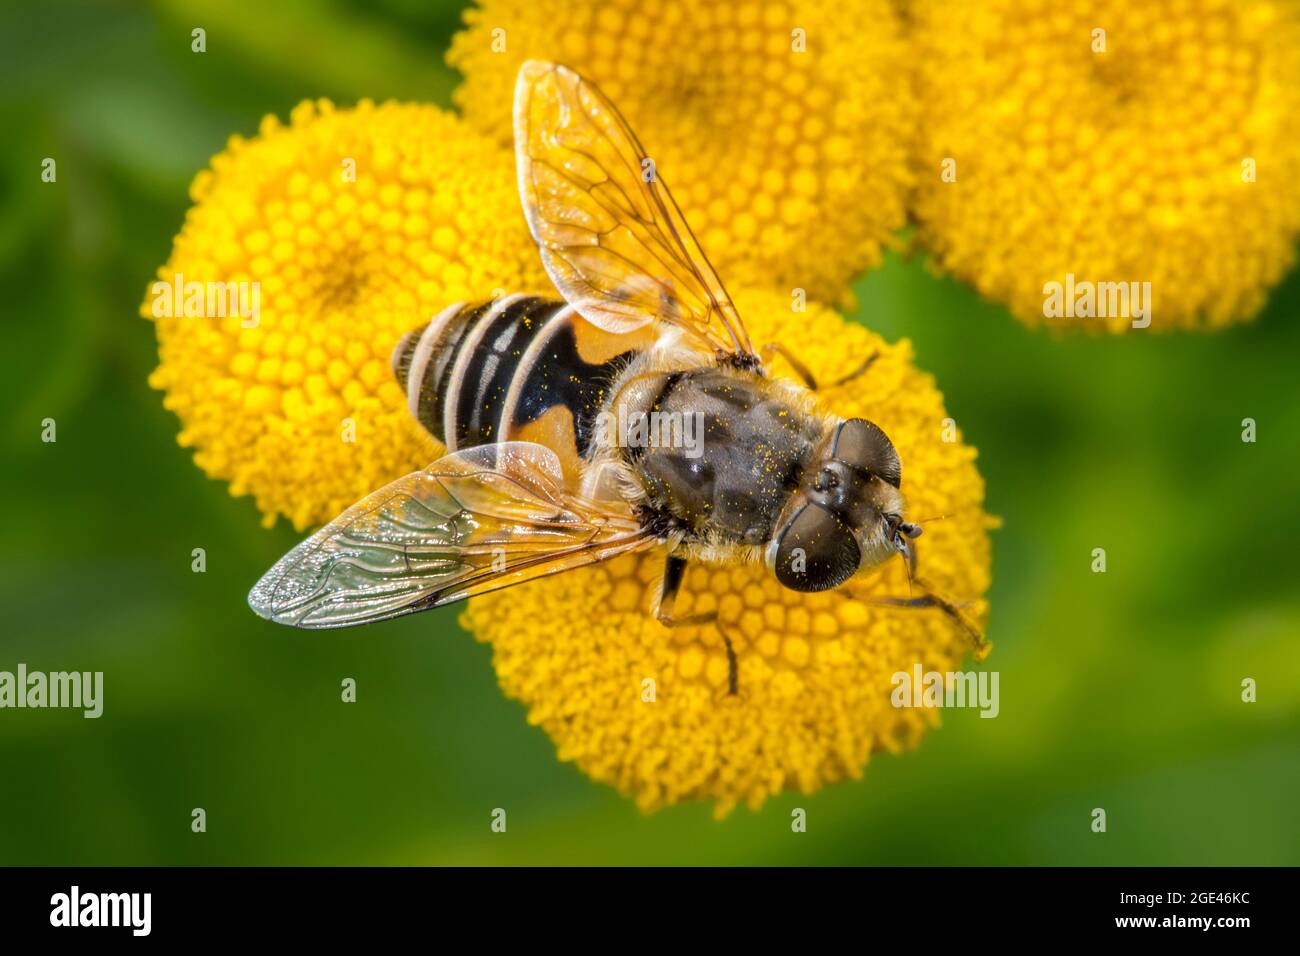 European drone fly / dronefly (Eristalis arbustorum) female hoverfly feeding on nectar from common tansy (Tanacetum vulgare) in flower in summer Stock Photo